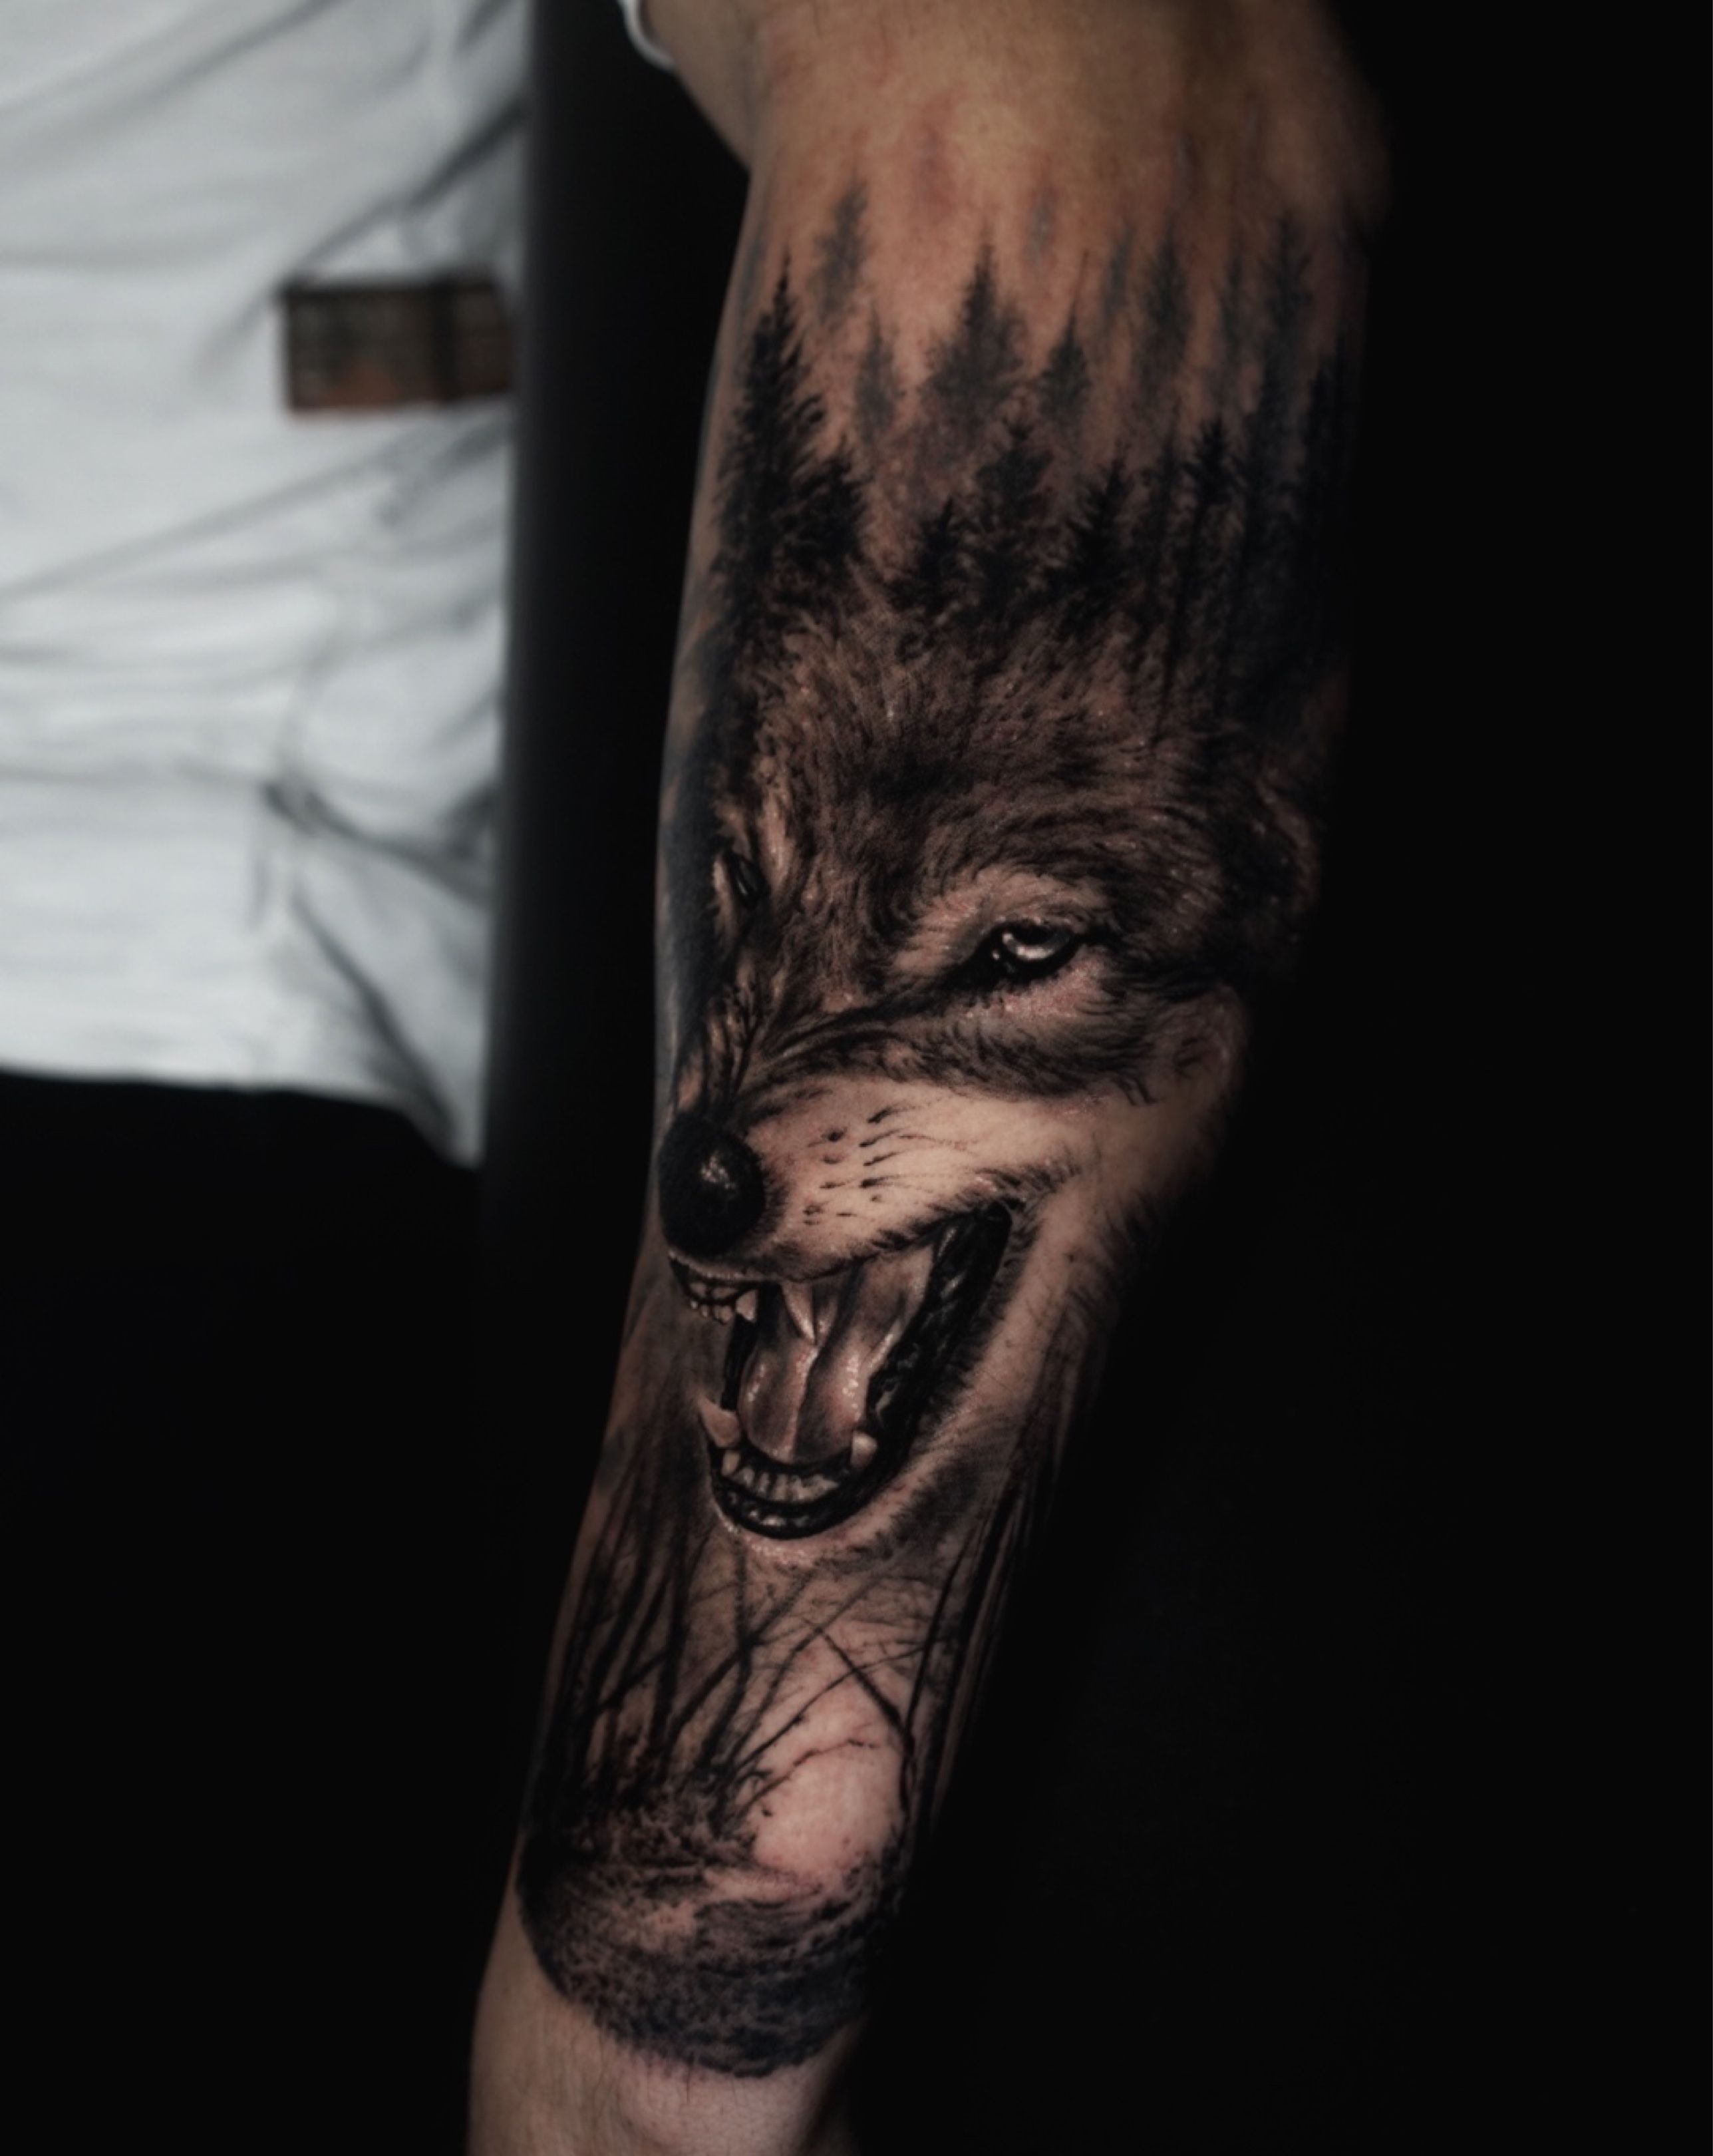 Tattoo Connect on Twitter Angry Wolf tattoo tattoo by artist  httpstcoK0HqYffxiC from Melbourne melbournetattoo chesttattoo  wolftattoo blackinked blackandgreyinked tattoo httpstcotlksGhHw8J   Twitter